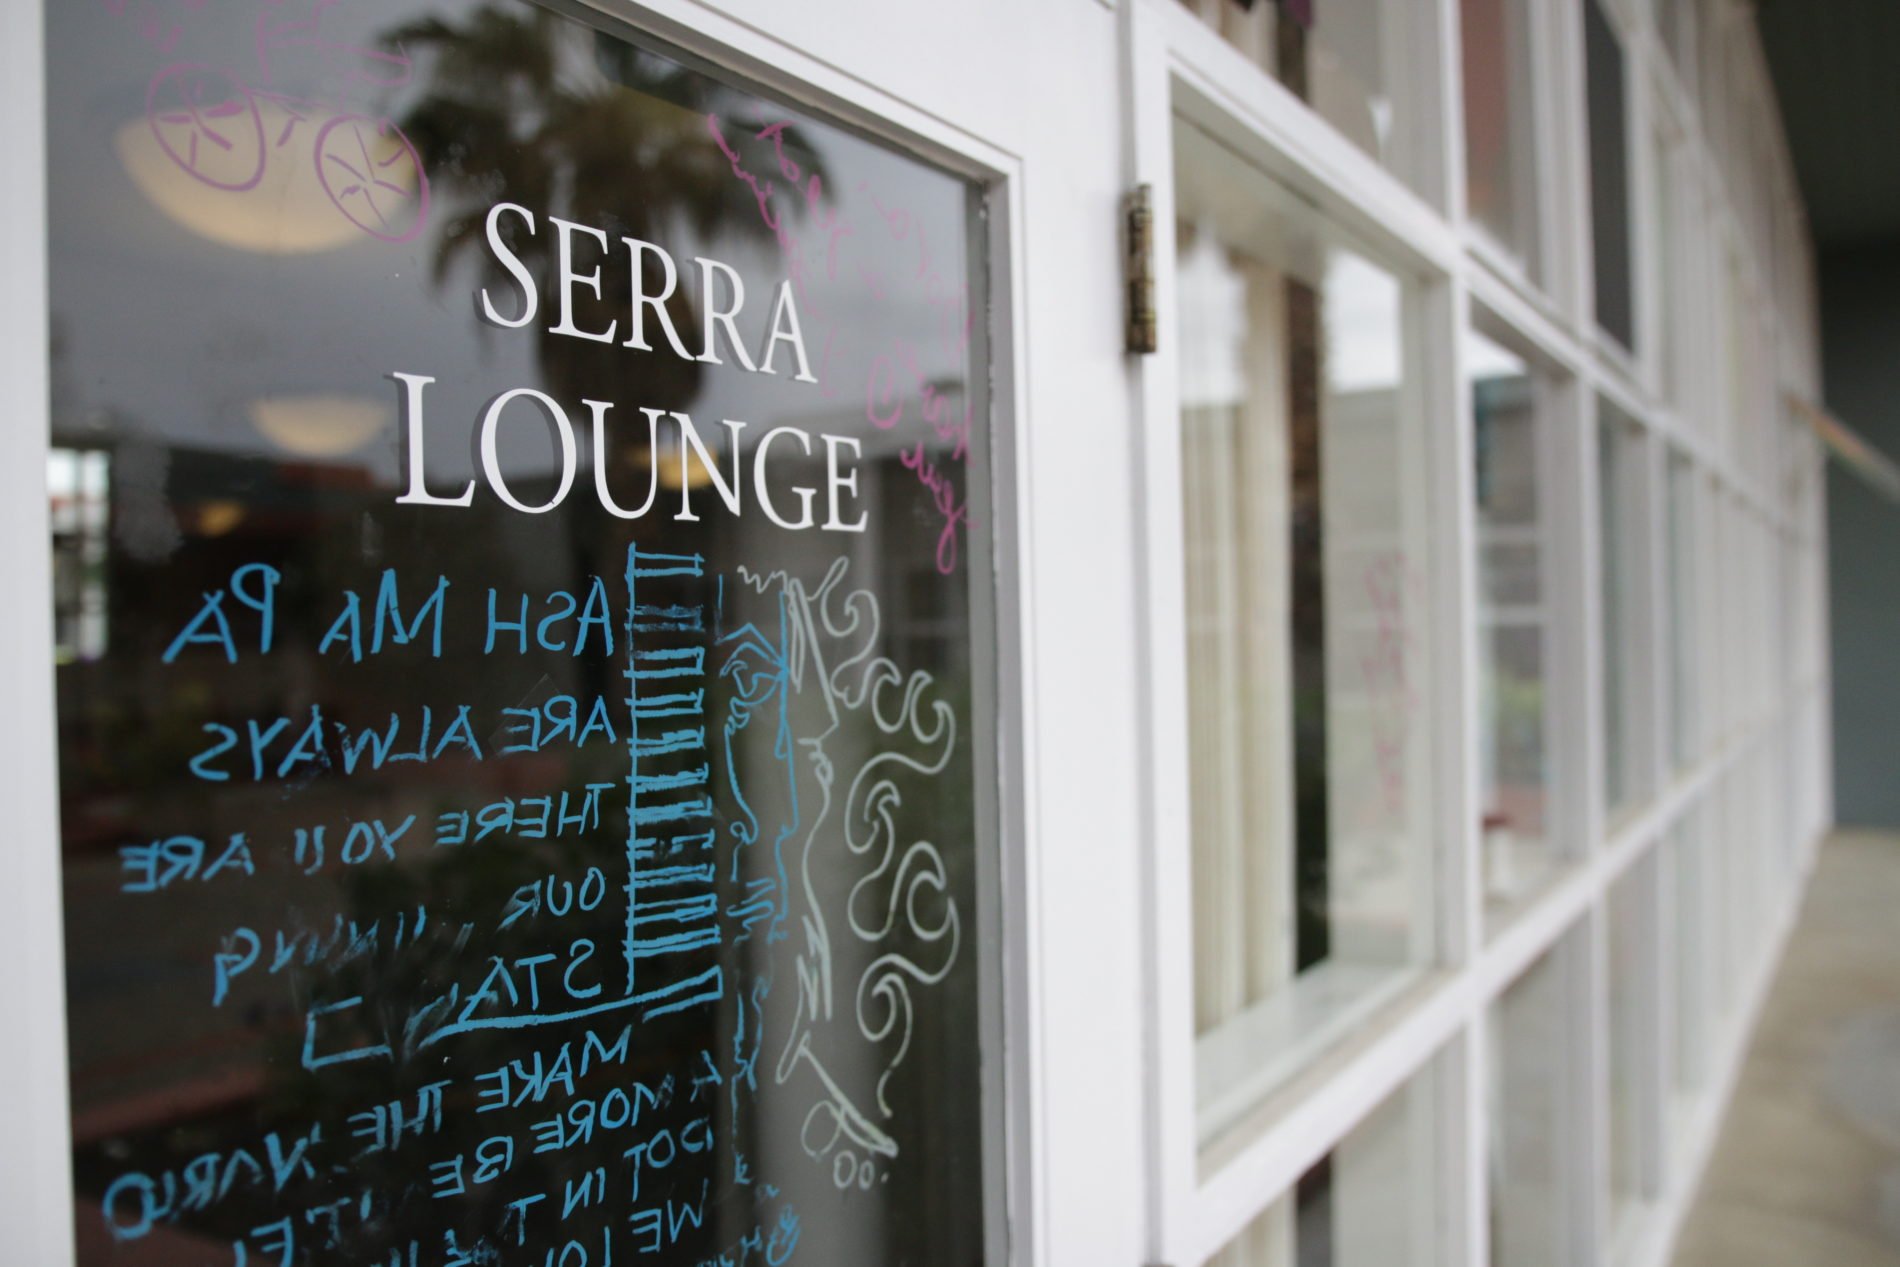 Delayed renaming committee no longer aiming for recommendation on Serra